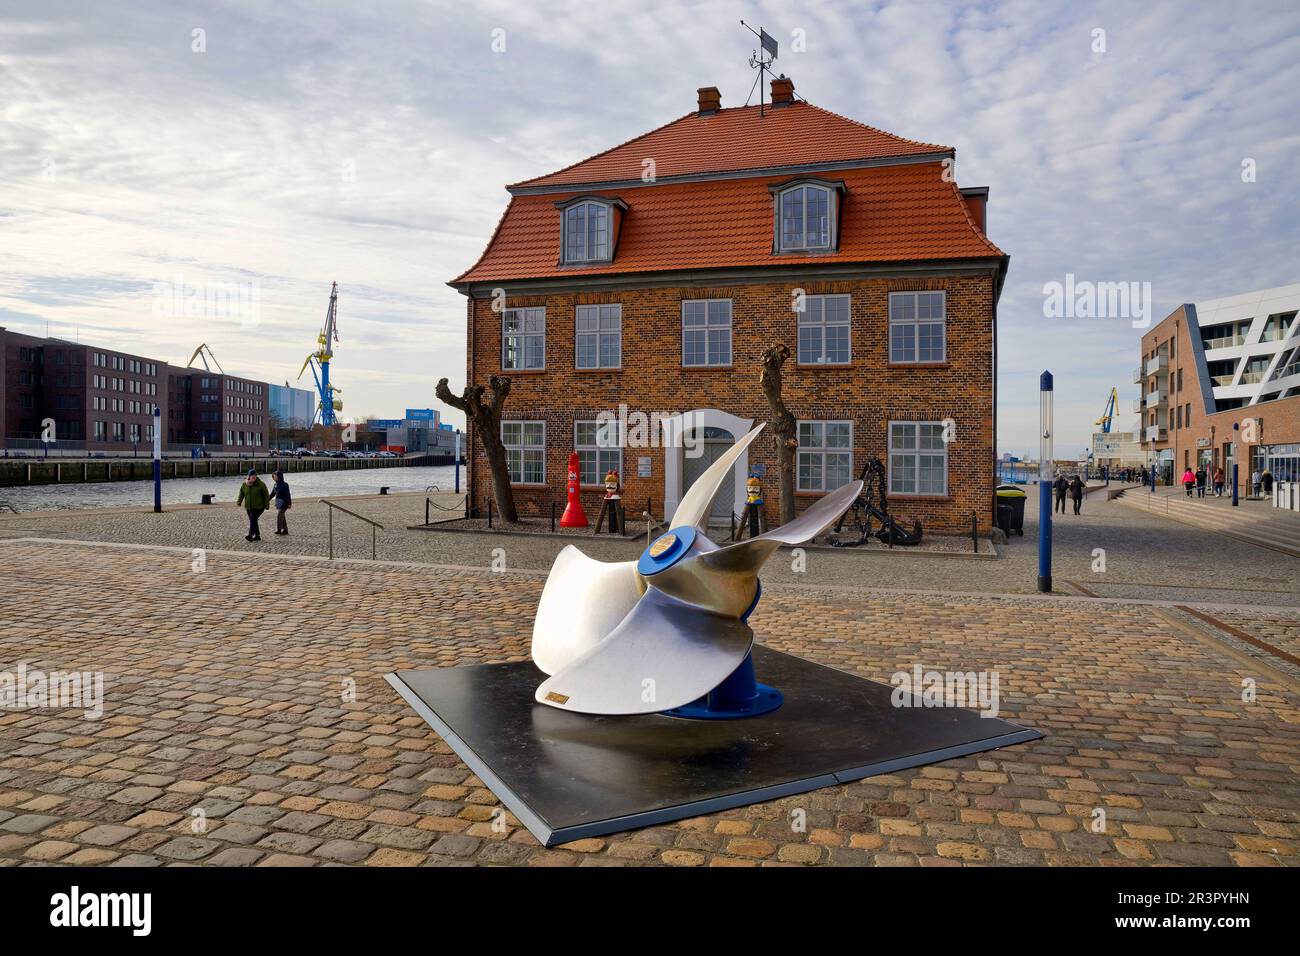 rudder propeller for harbor and ocean-going tugs in front of the Baumhaus, Hanseatic city of Wismar, Germany, Mecklenburg-Western Pomerania, Wismar Stock Photo